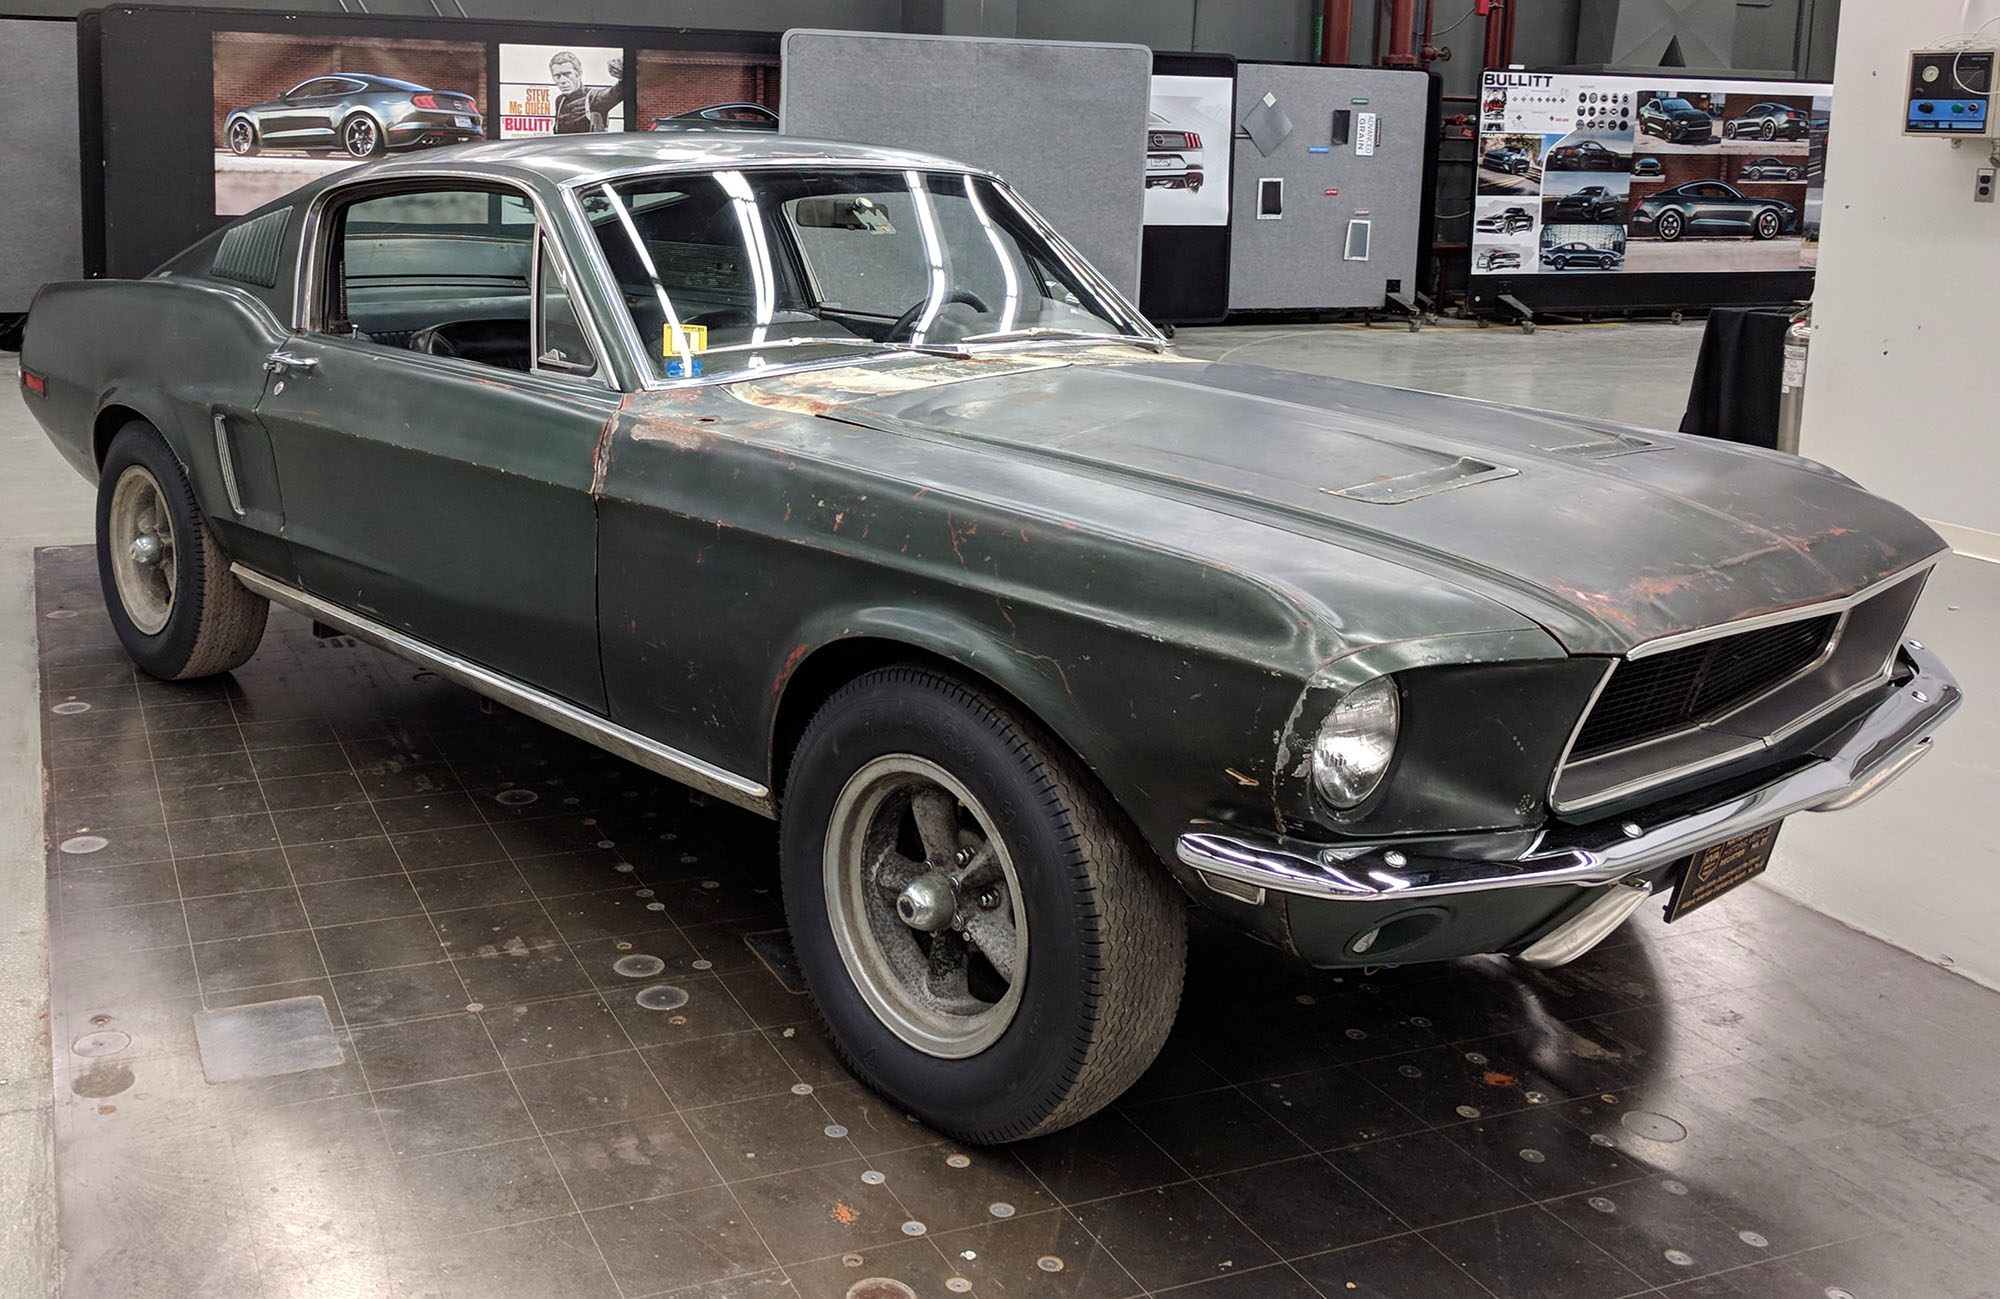   Deep underground at Ford's Product Development Center (PDC) in Dearborn, I met Bullitt Mustang #559 and its owner in person for the first time. The date was Jan. 11, 2018. I also got to view the 2019 Bullitt limited edition model, which had not be 